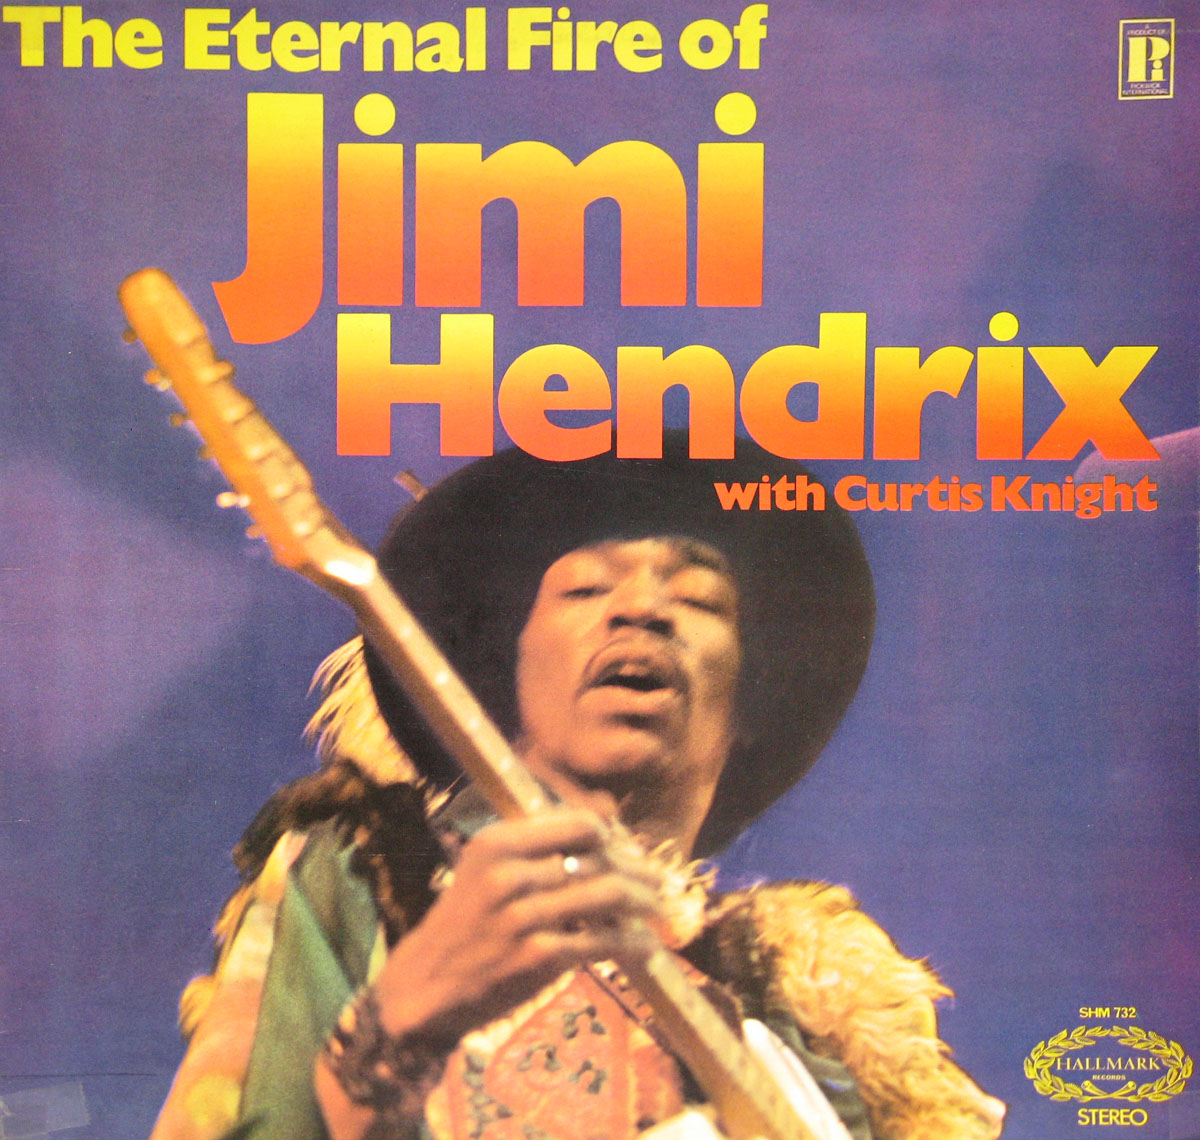 Album front cover of the "Eternal Fire with Jimi Hendrix"